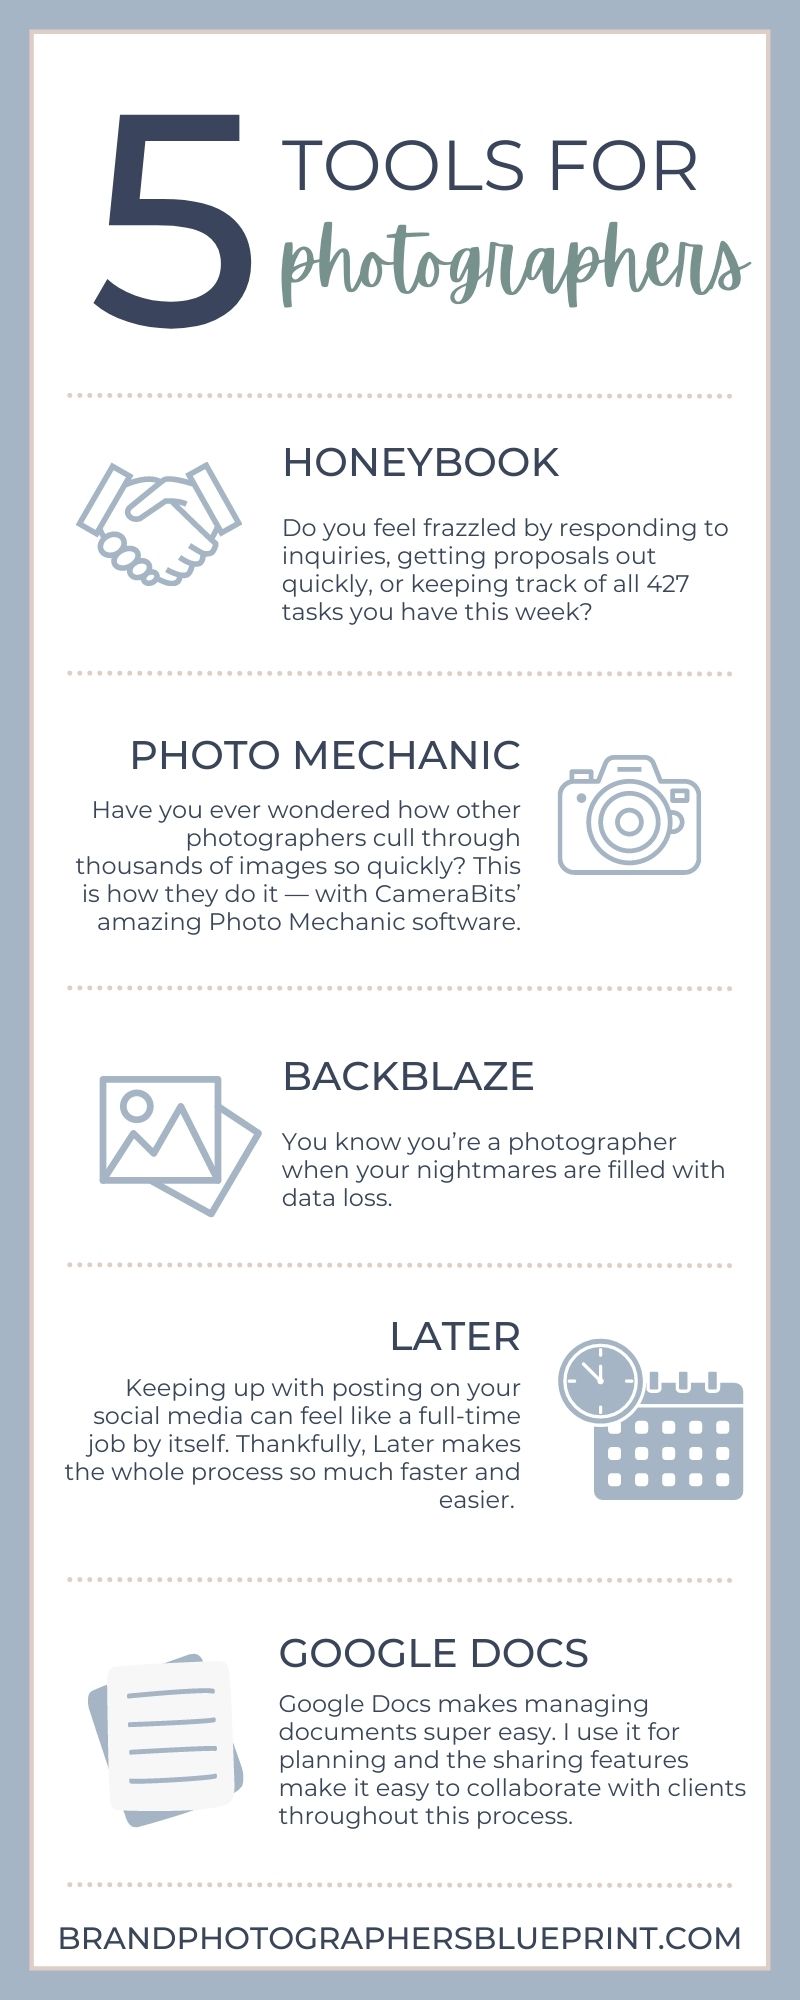 infographic about 5 tools that all brand photographers need to summarize the entire article